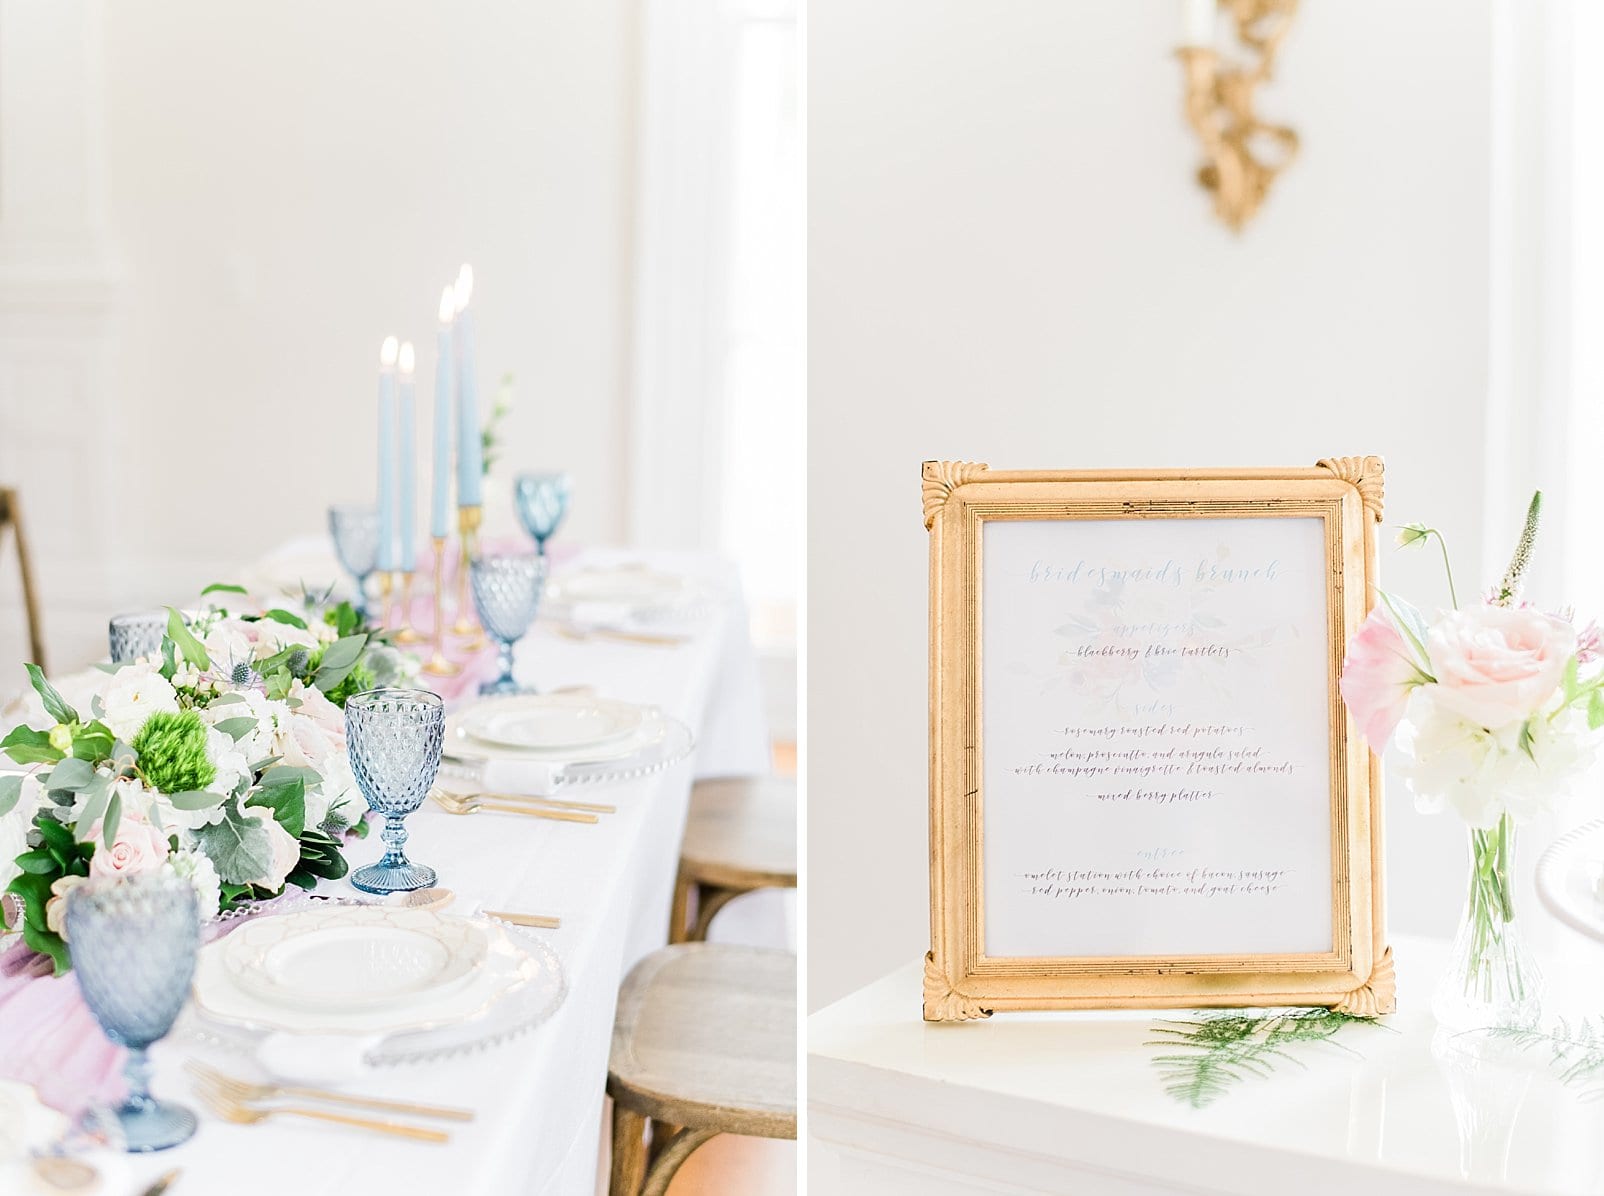 Merrimon wynne bridal luncheon with gold framed menu and light blue and pink accent colors on table setting photo